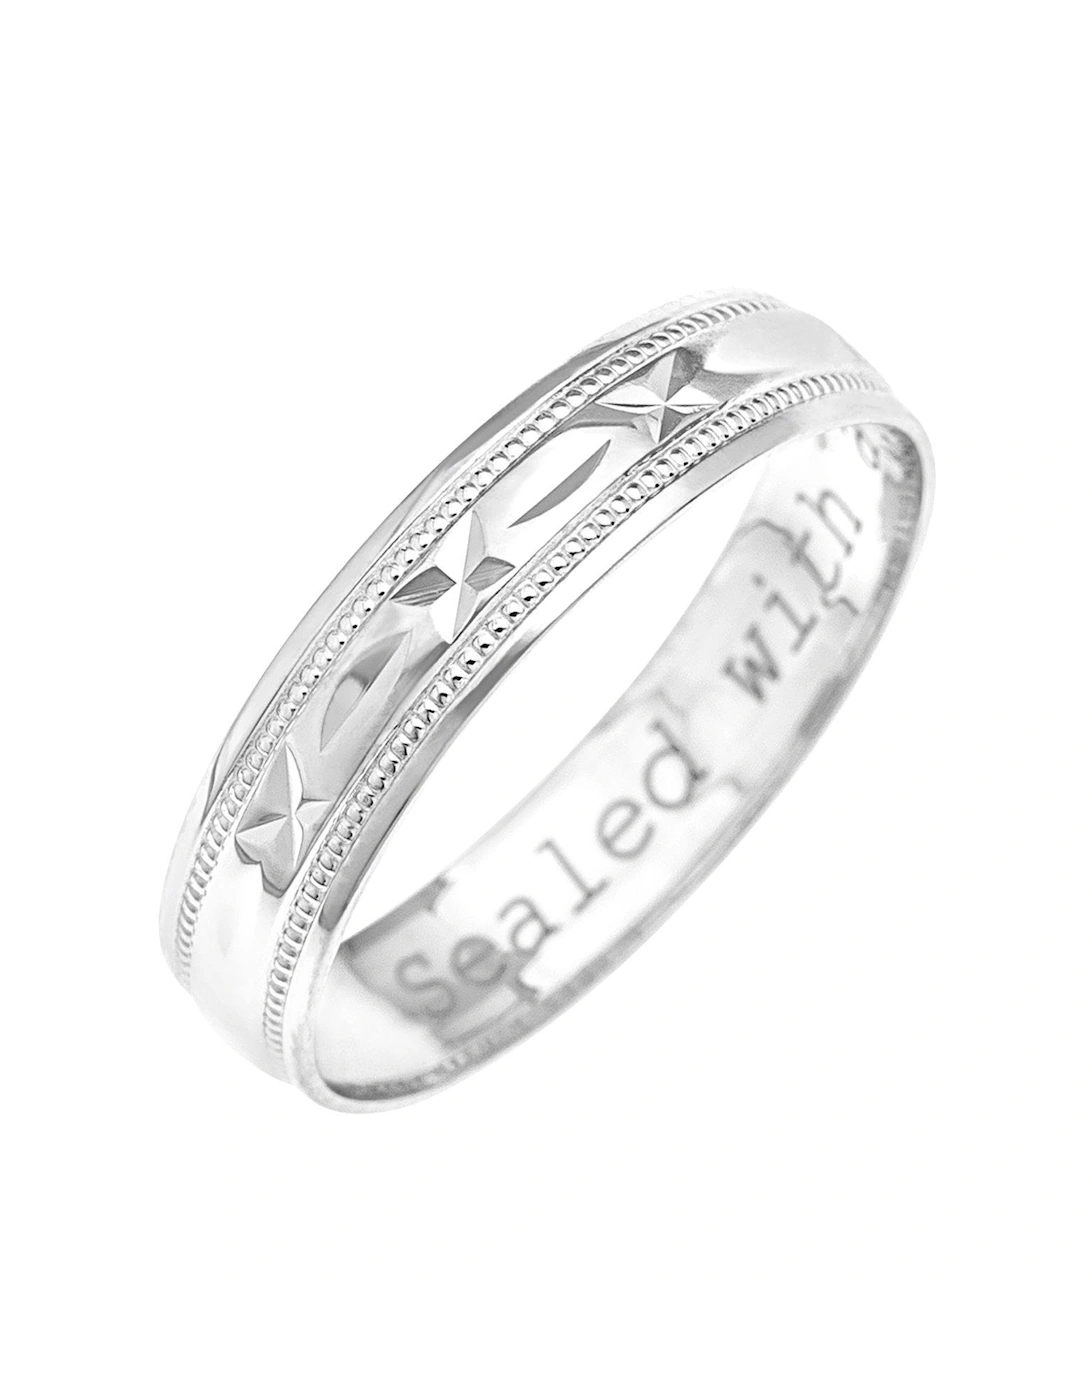 9ct White Gold Diamond Cut 4mm Wedding Band With Message 'Sealed With A Kiss', 2 of 1